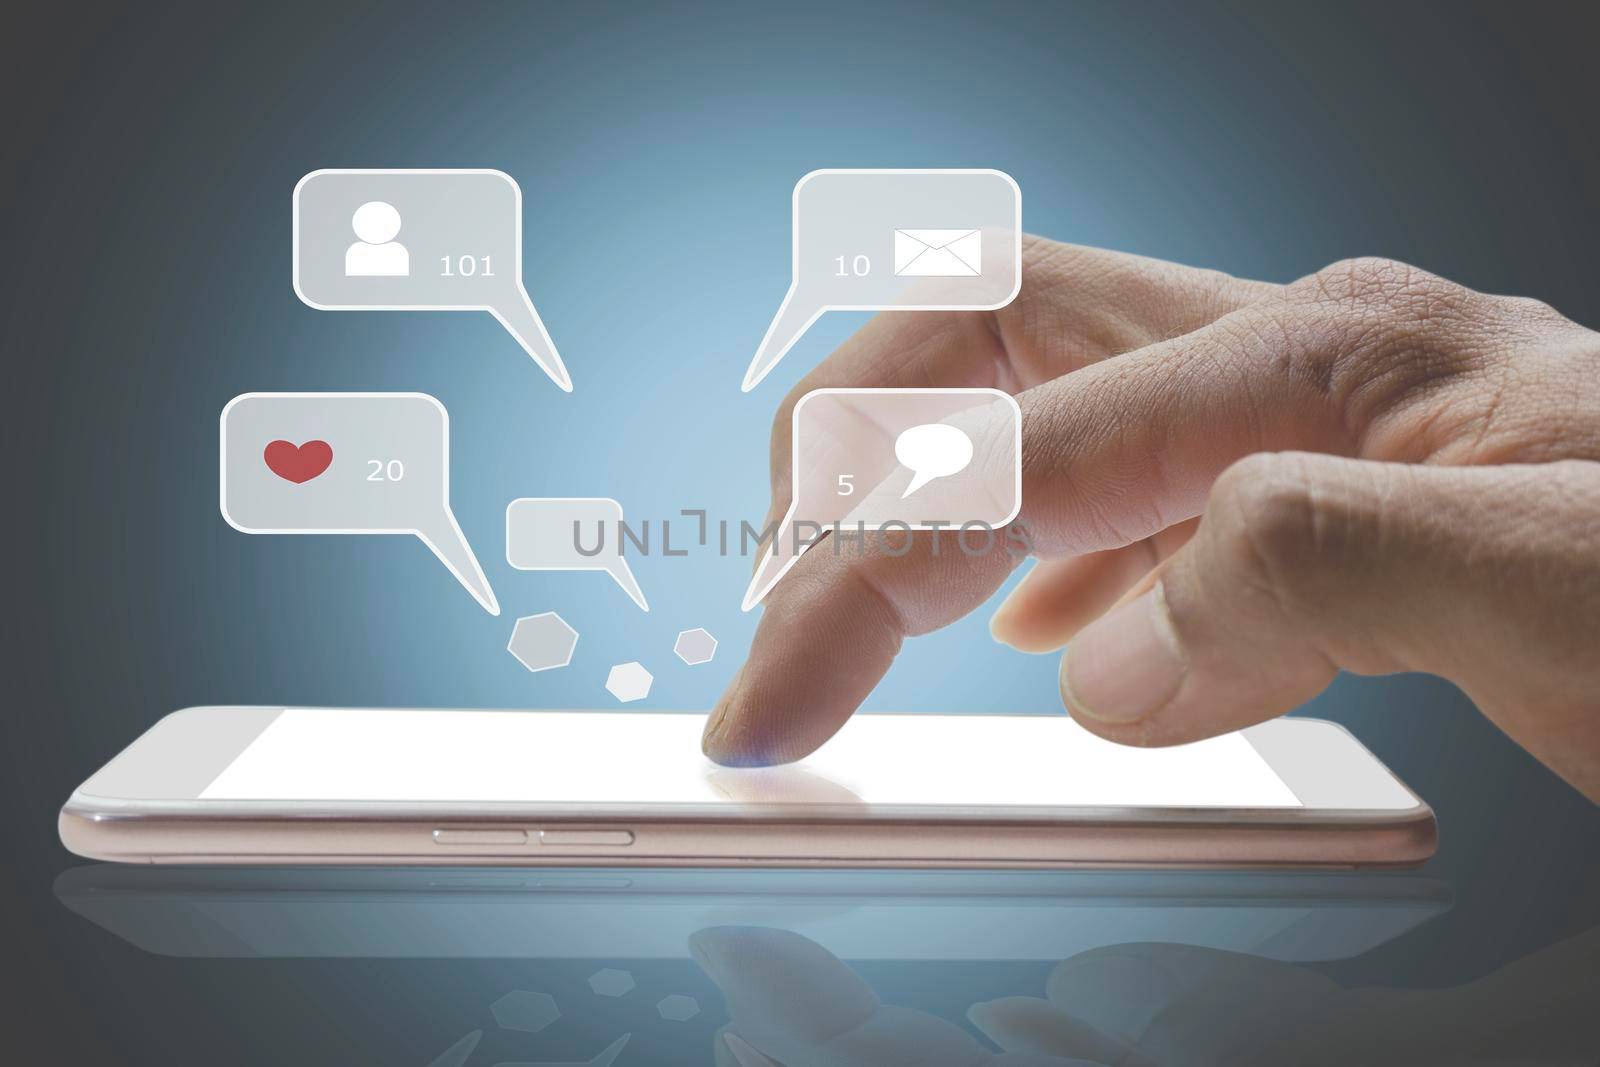 Closeup of person finger hand using a social media chat on a mobile phone with notification icons of like, message, comment, and star above smartphone screen. by yodsawai